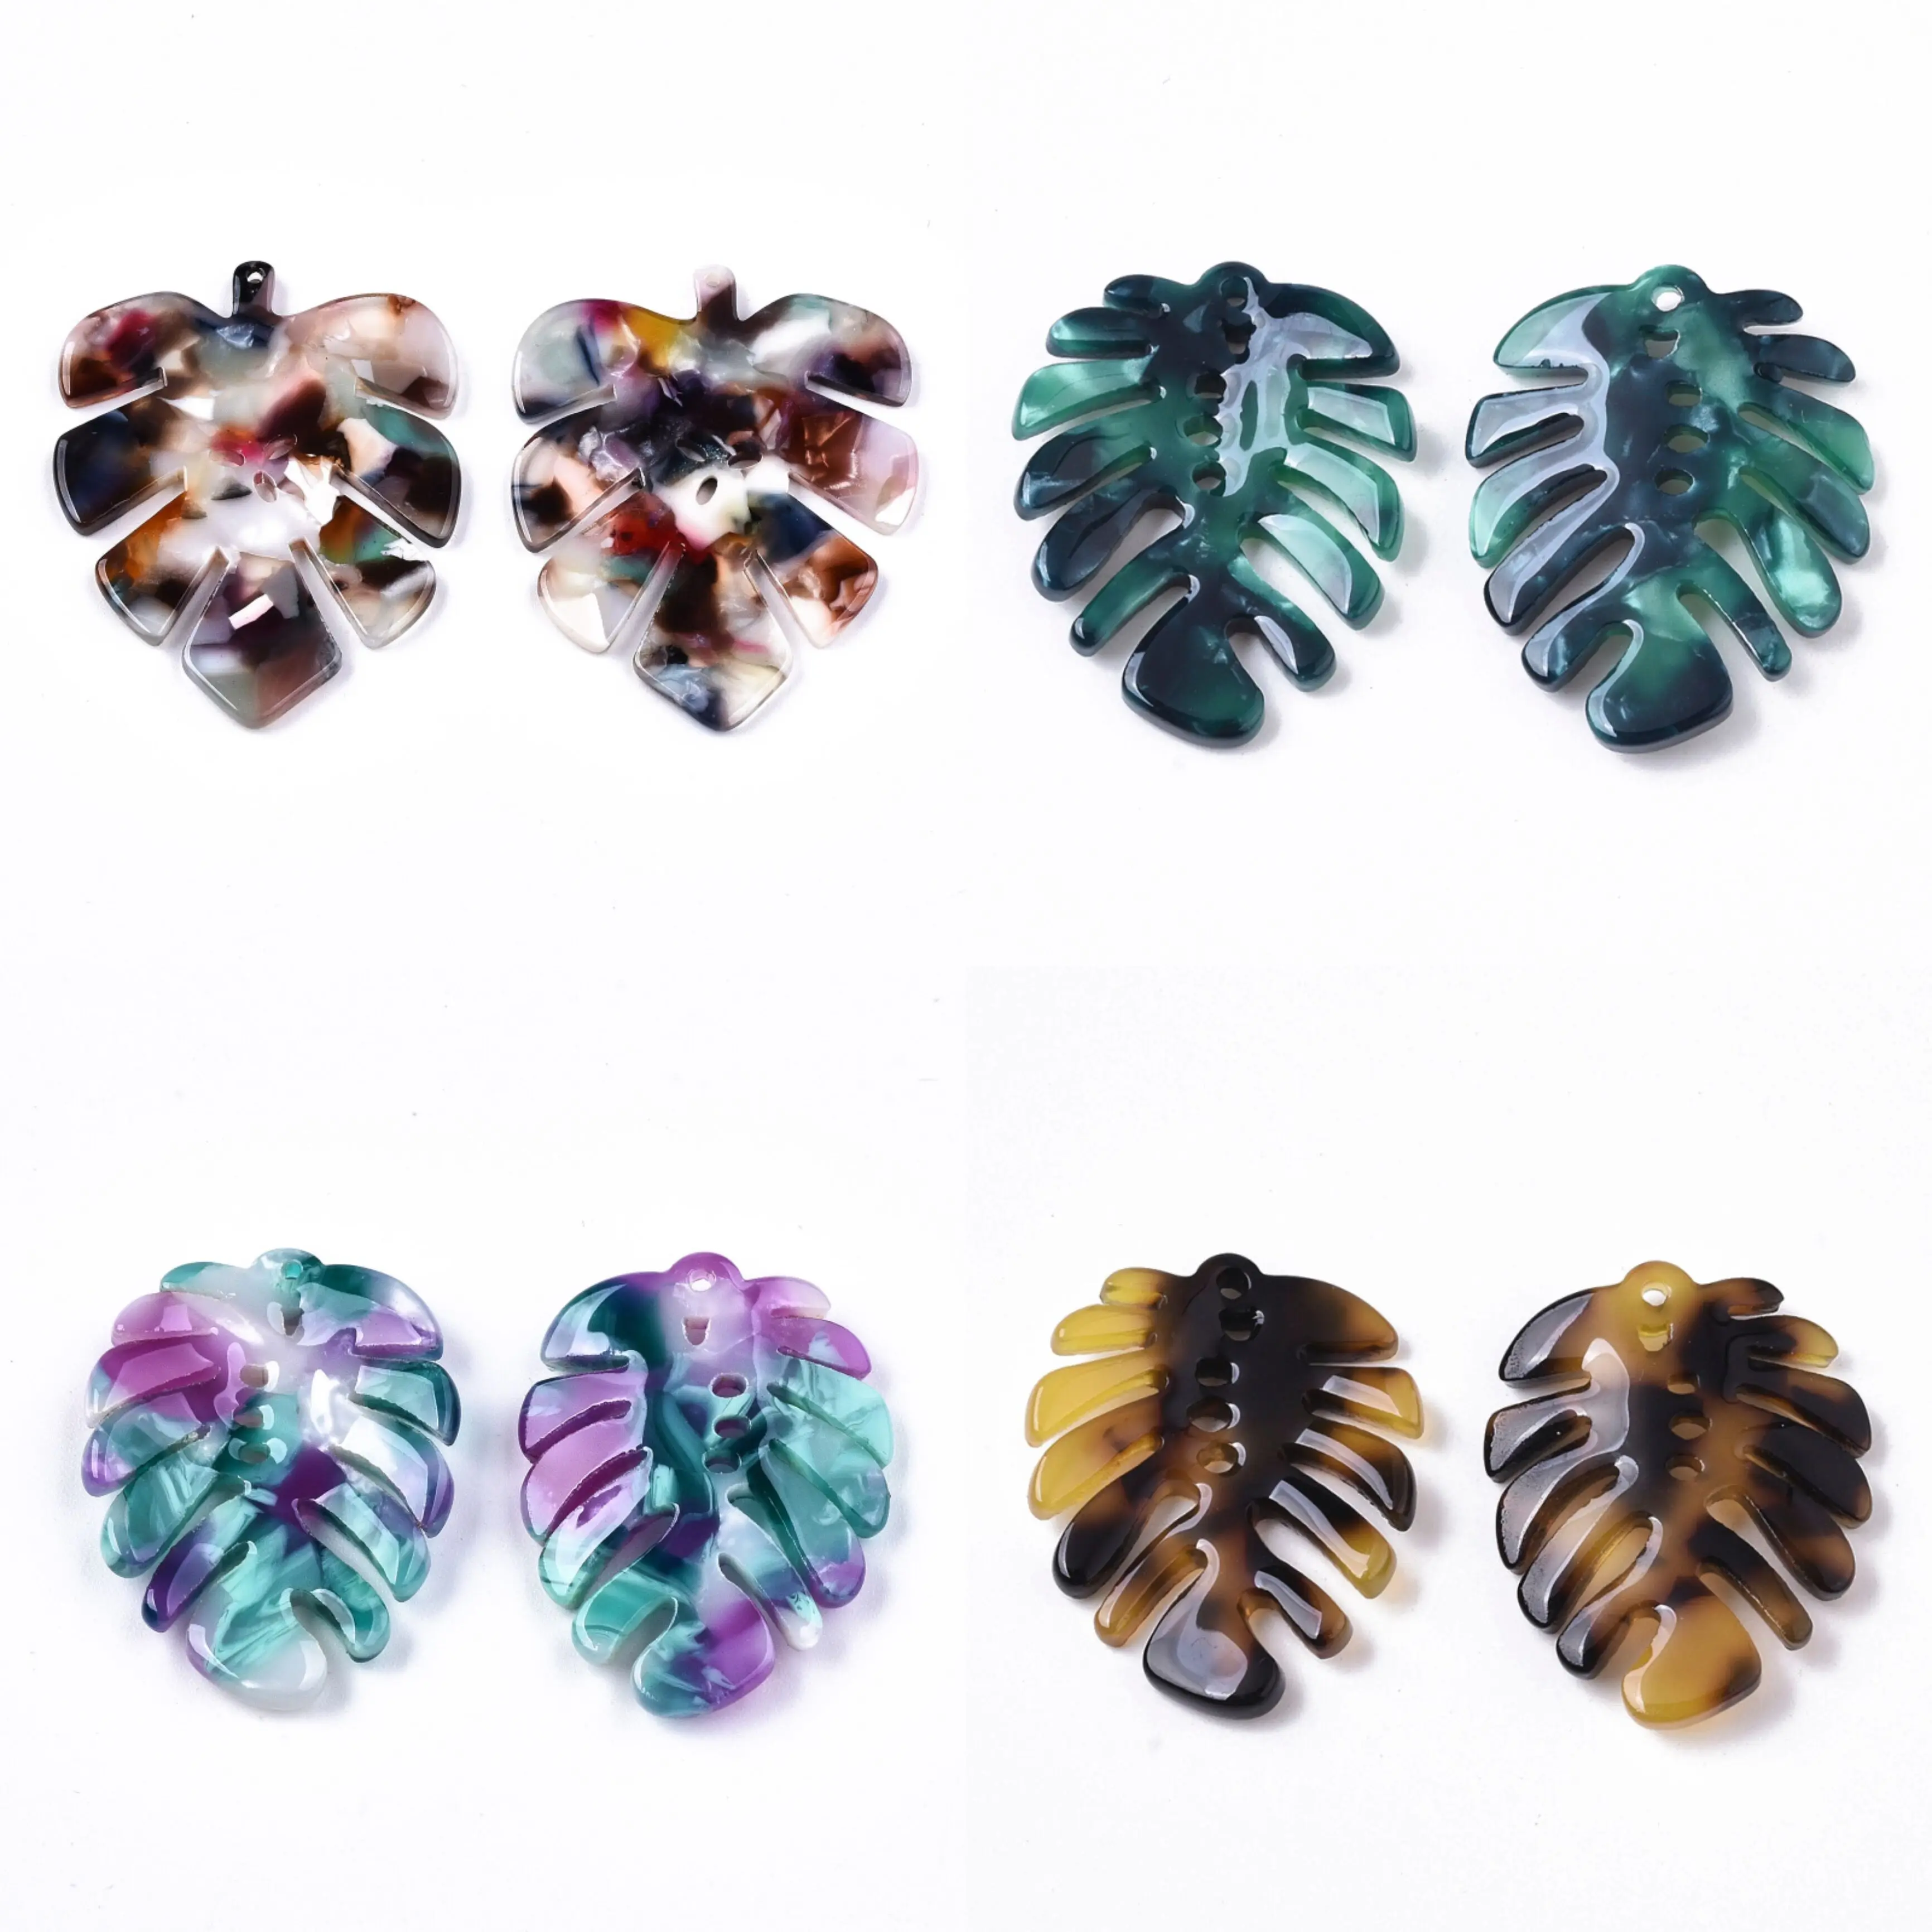 

10pcs Cellulose Acetate Resin Charms Monstera Leaf Dangle Earring Charm Pendants for DIY Jewelry Necklace Making Supply Colorful